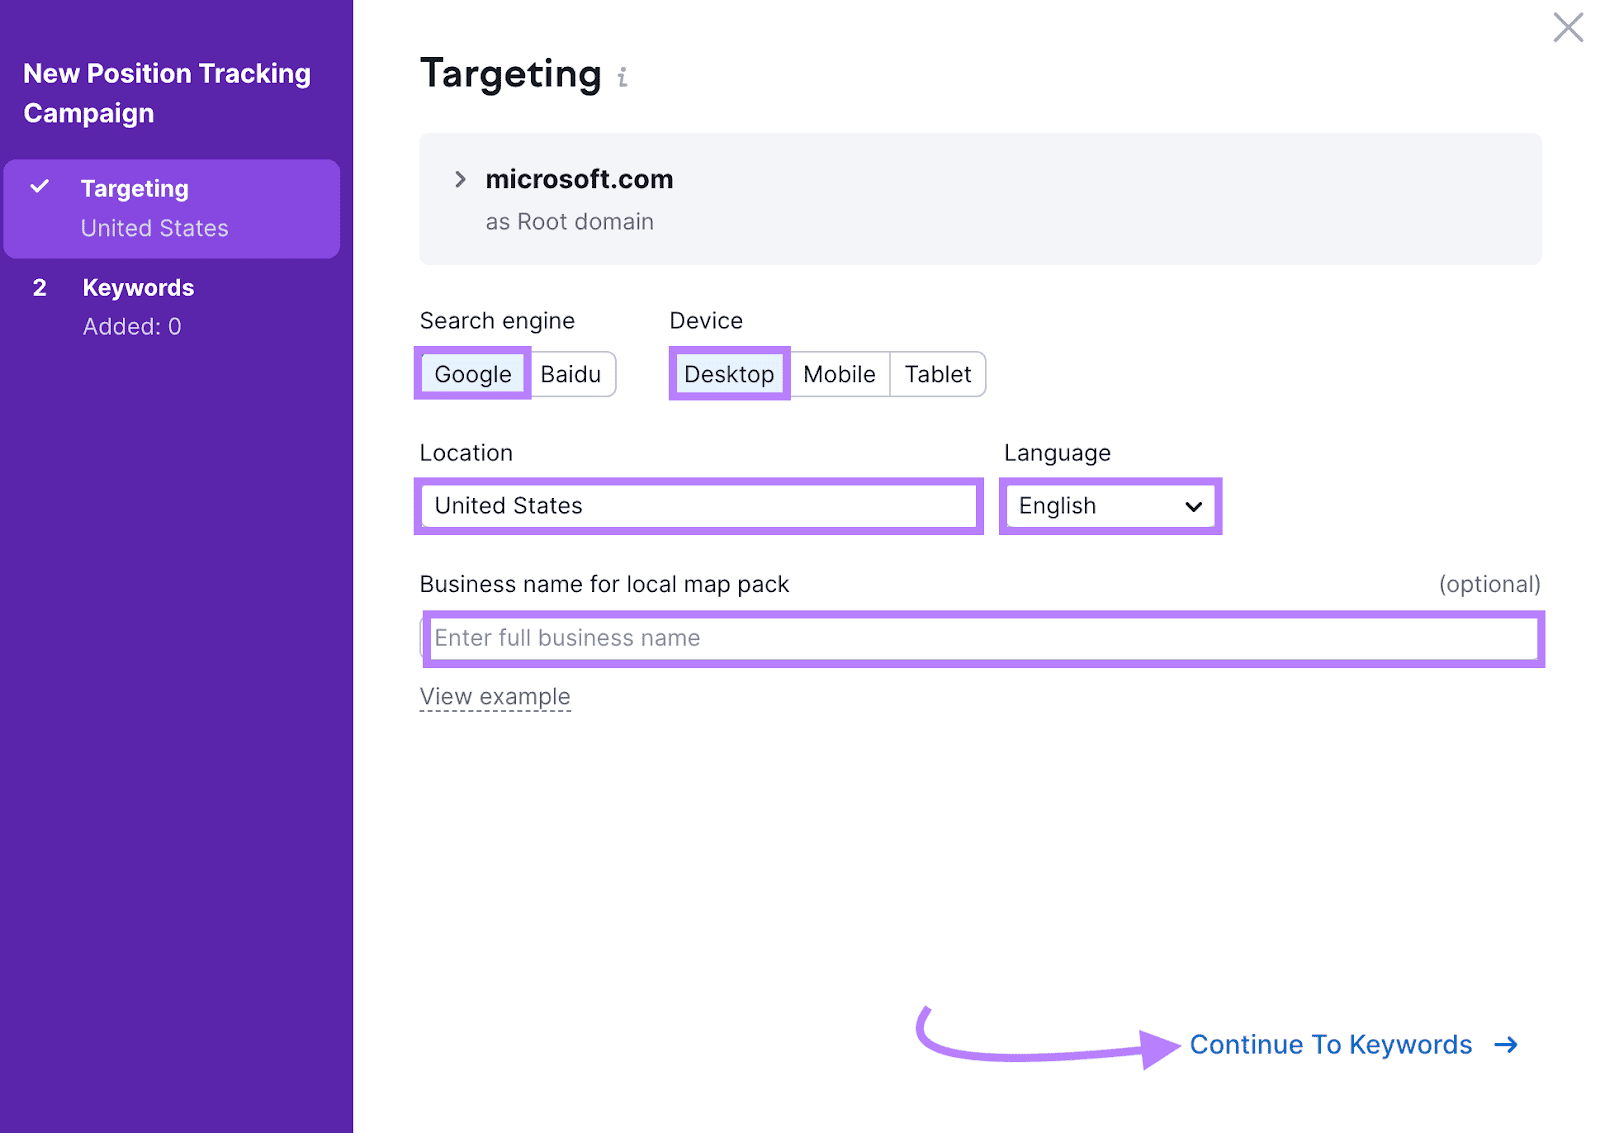 "Targeting" window in New Position Tracking Campaign settings